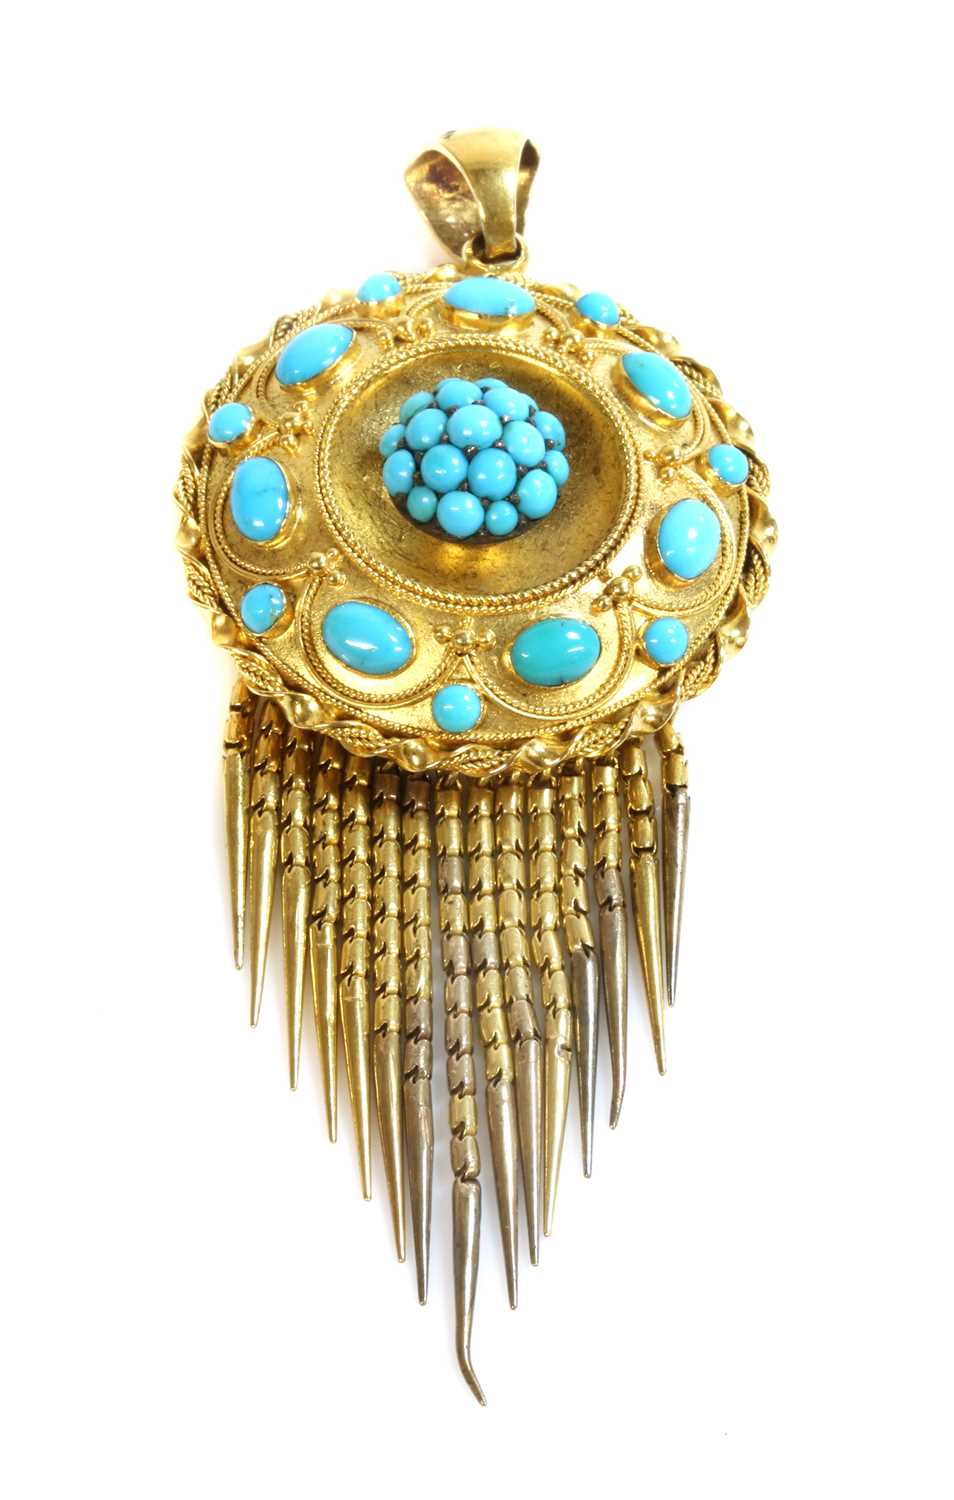 Lot 34 - A Victorian Etruscan Revival gold and turquoise set fringe pendant, c.1860